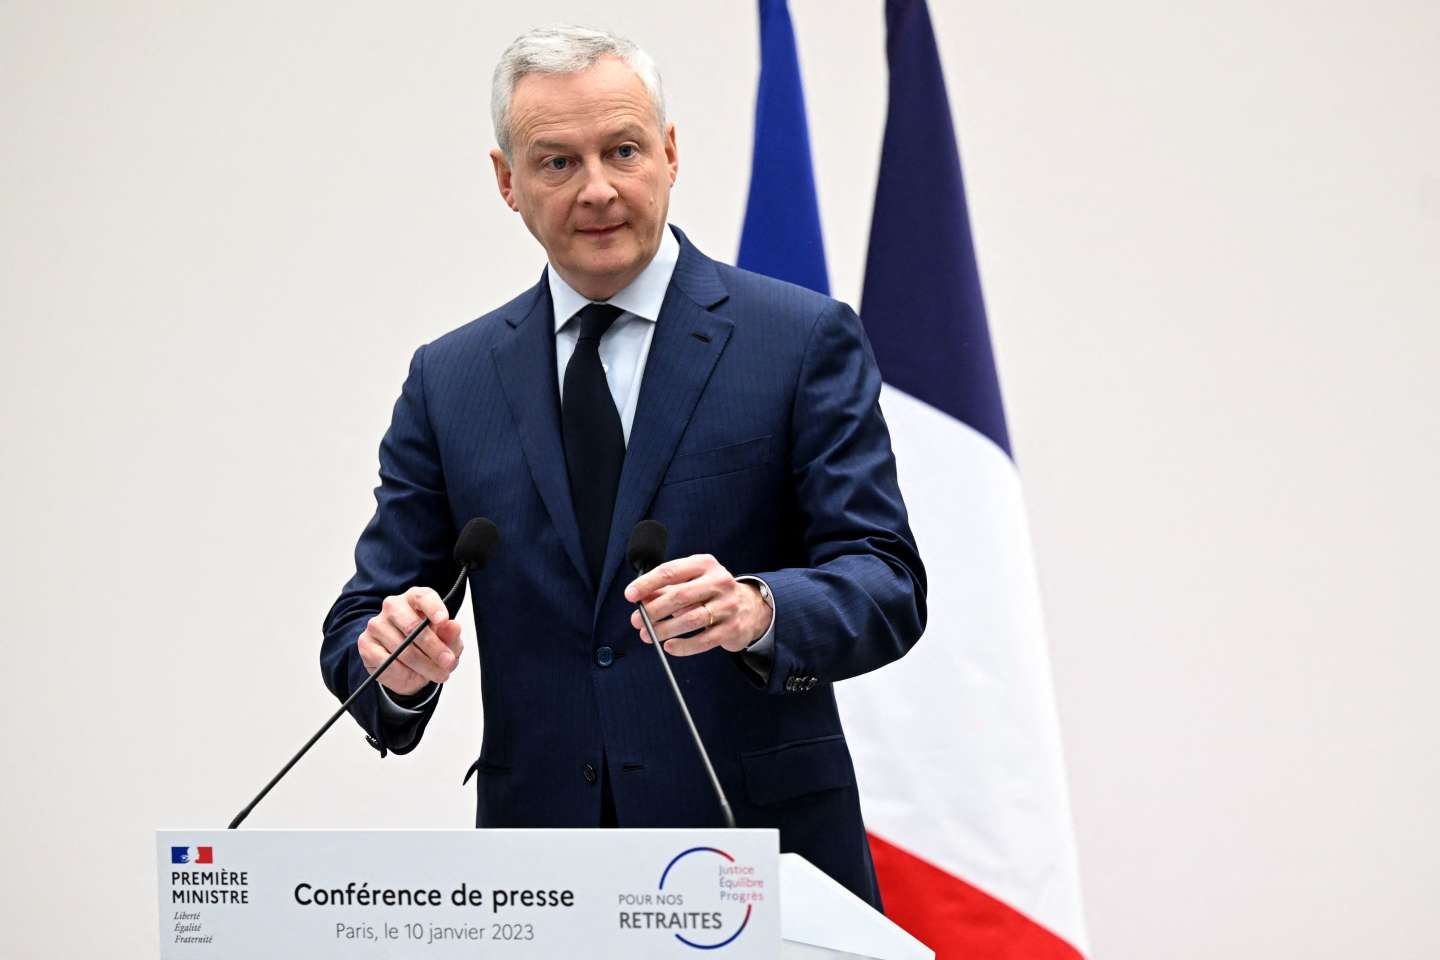 Bruno Le Maire announces the creation of a green savings plan for those under 18